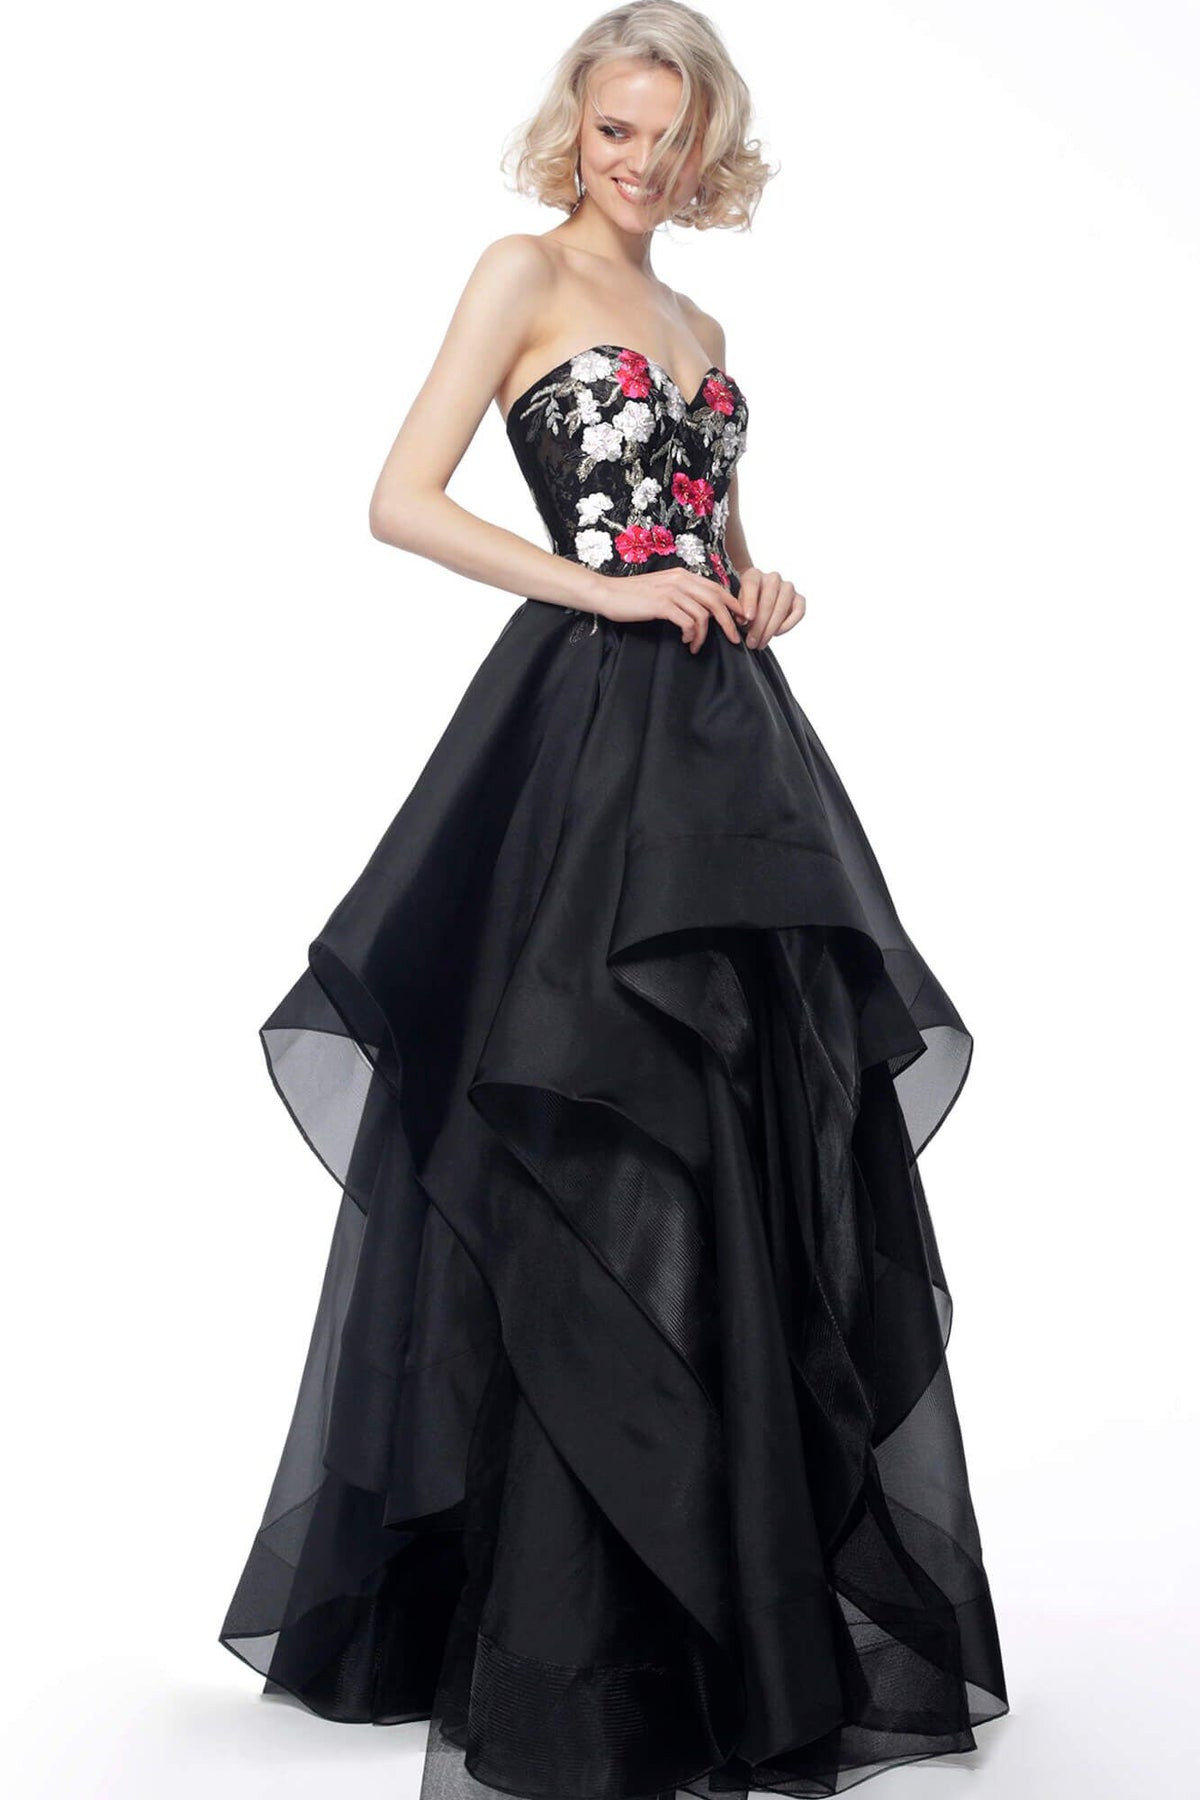 Jovani - 67206 Strapless Ruffled Skirt A-line Dress In Black and Multi